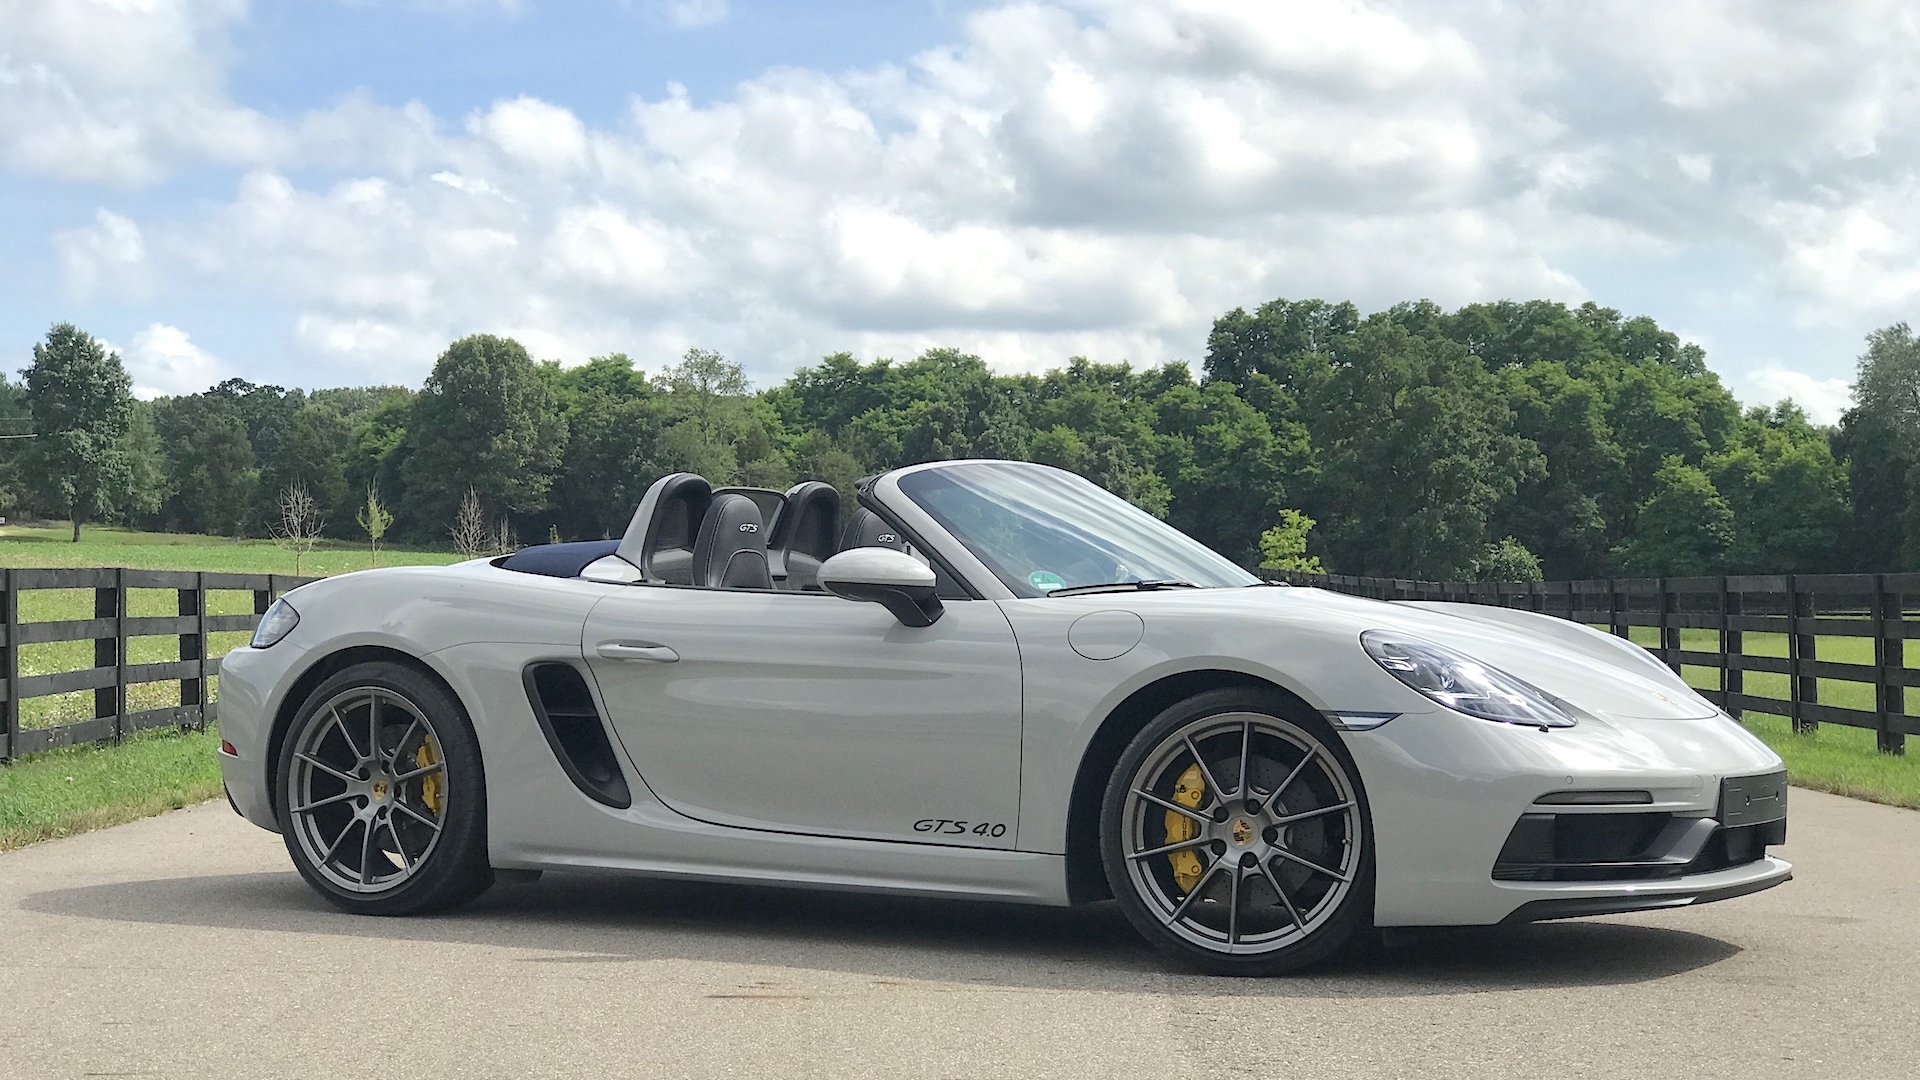 Porsche 718 Boxster GTS 4.0 (2021) – Specifications